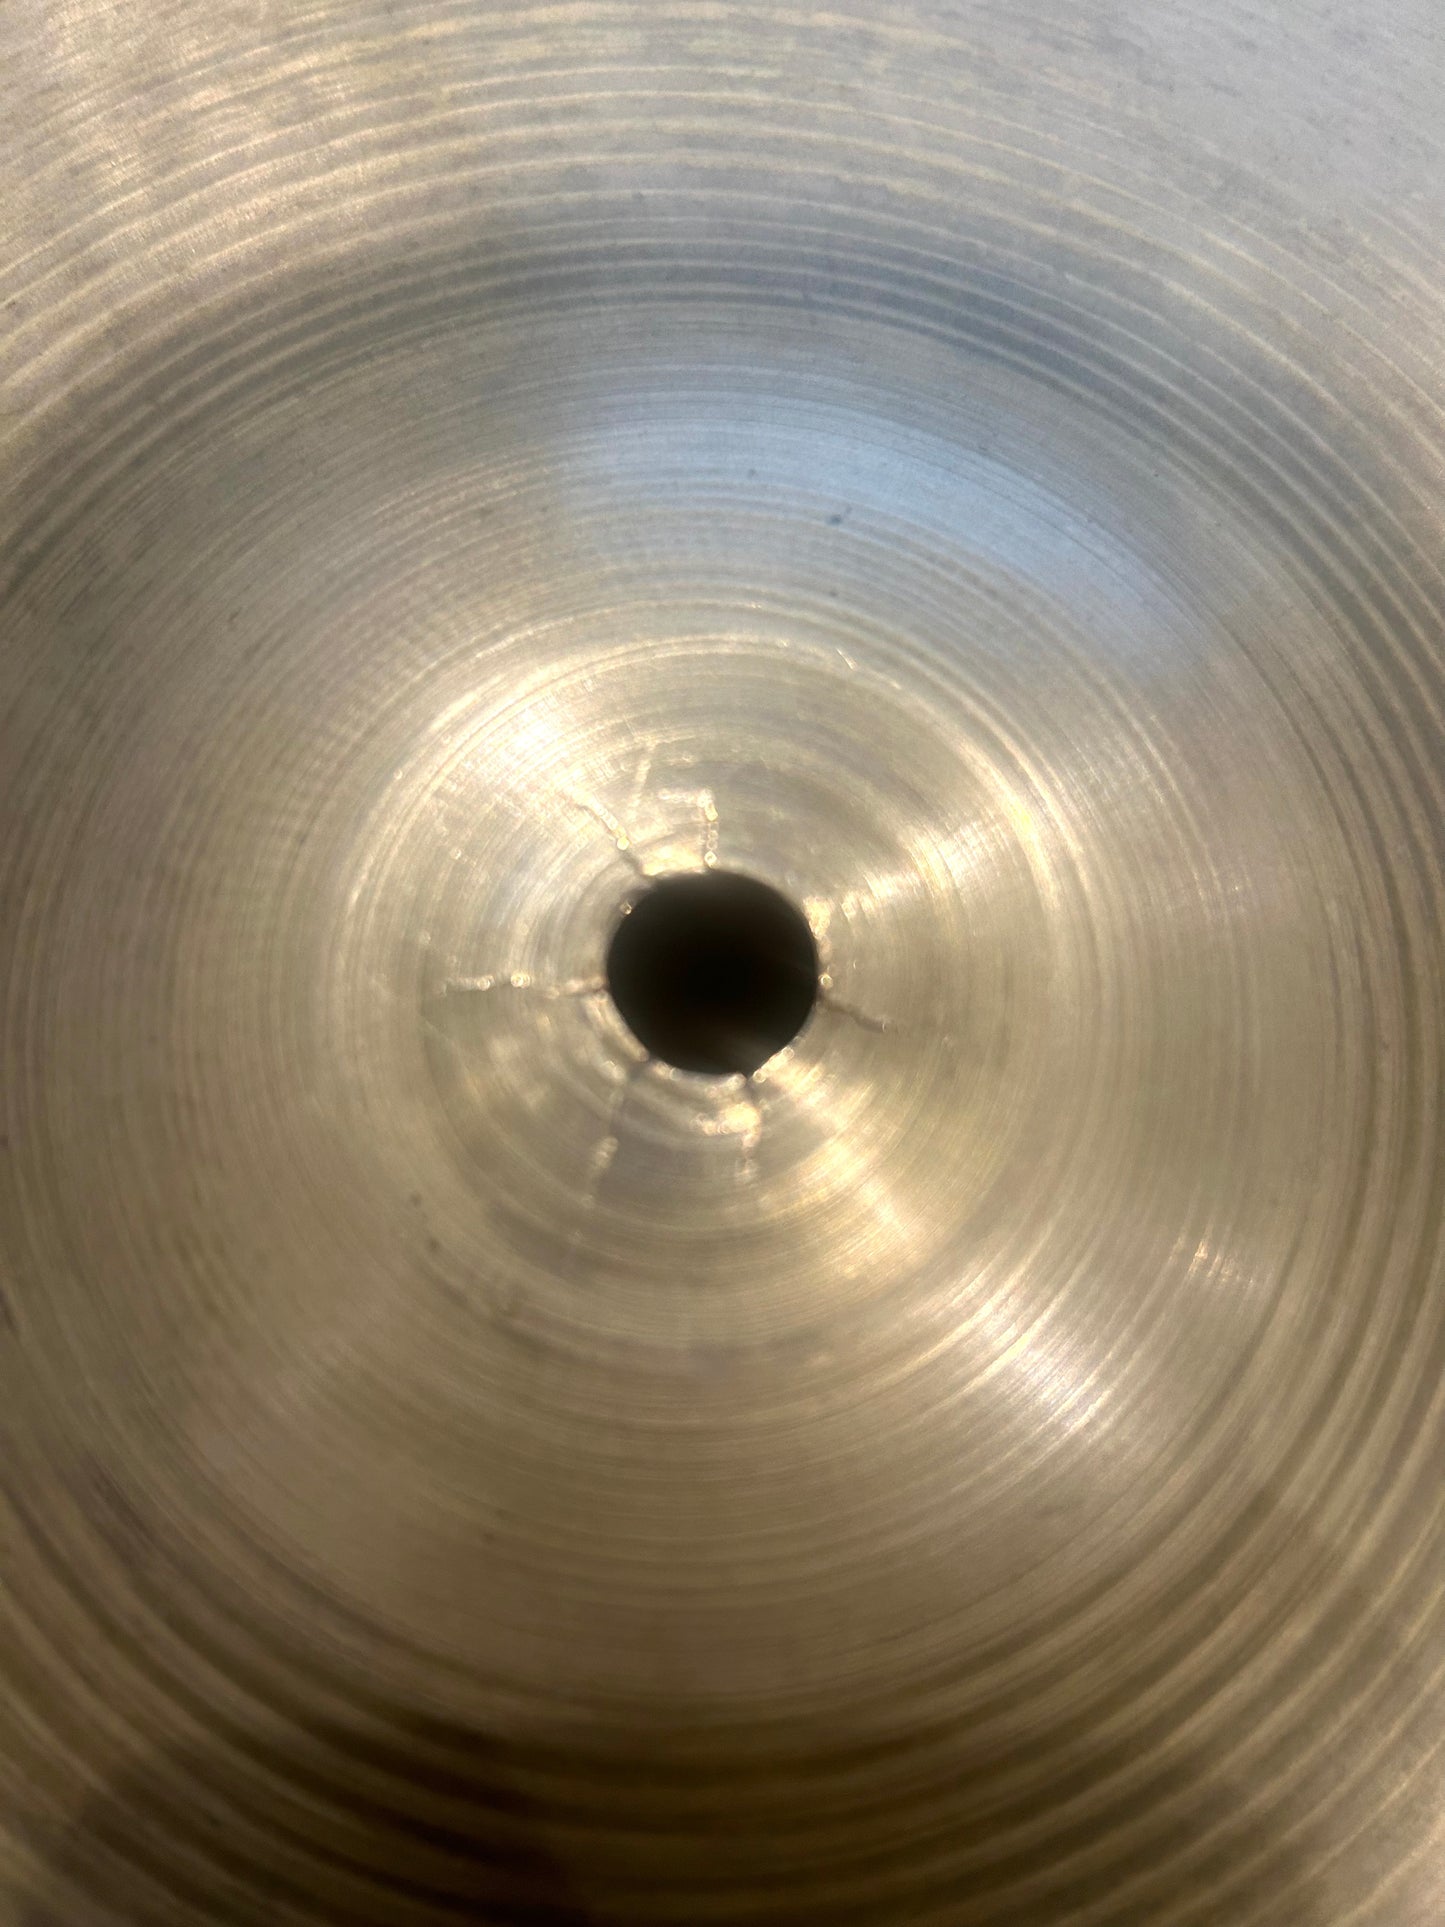 Zildjian 21” A Ride early 70s Stamp (Cracked)